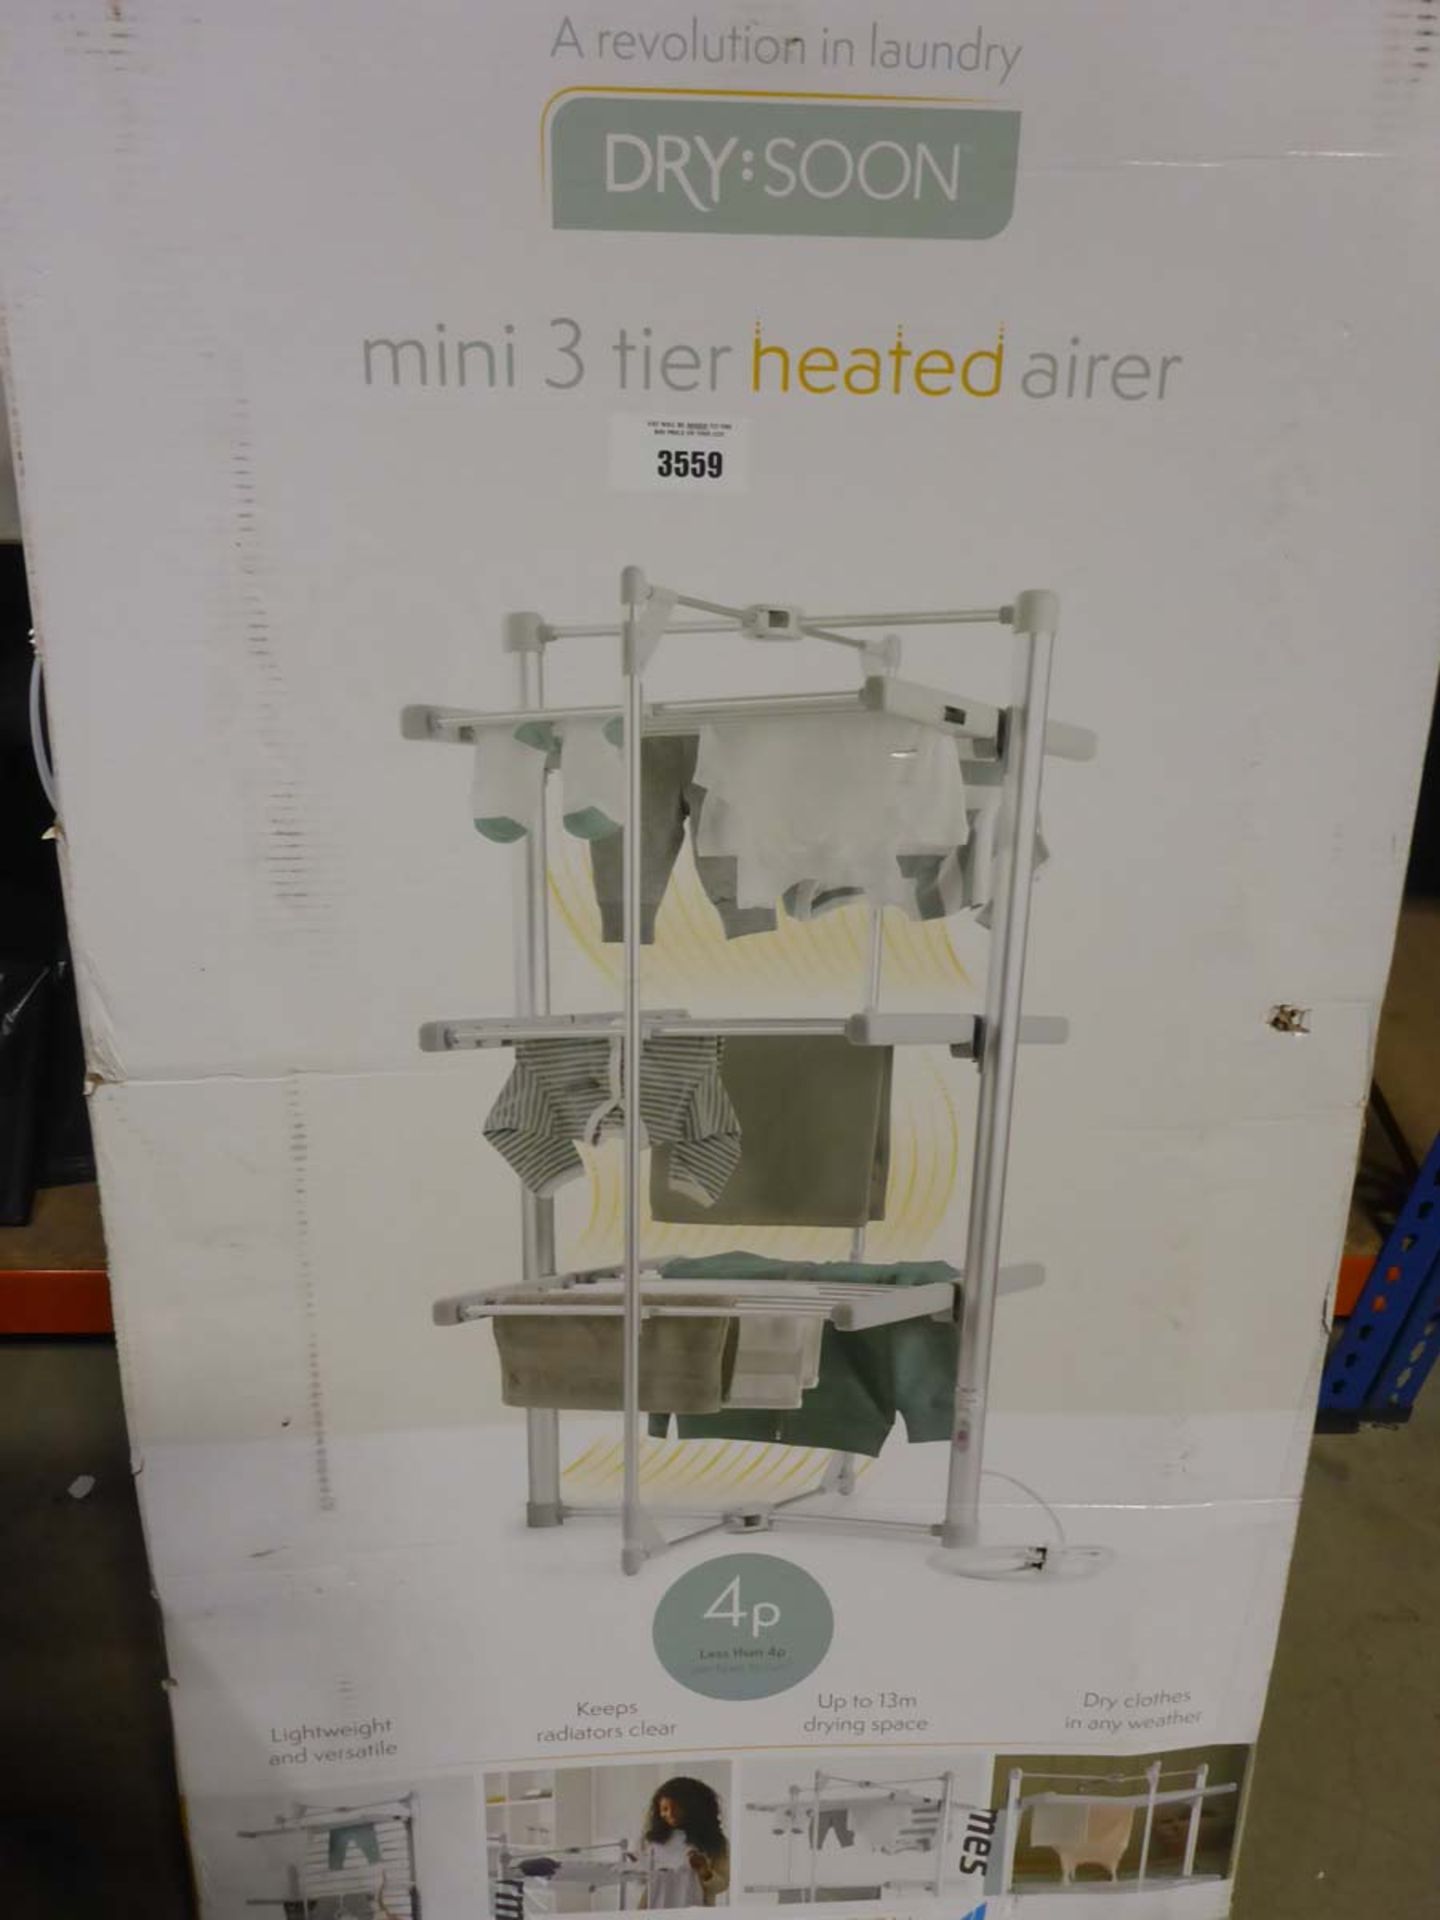 Dry Soon mini 3 tier heated airer